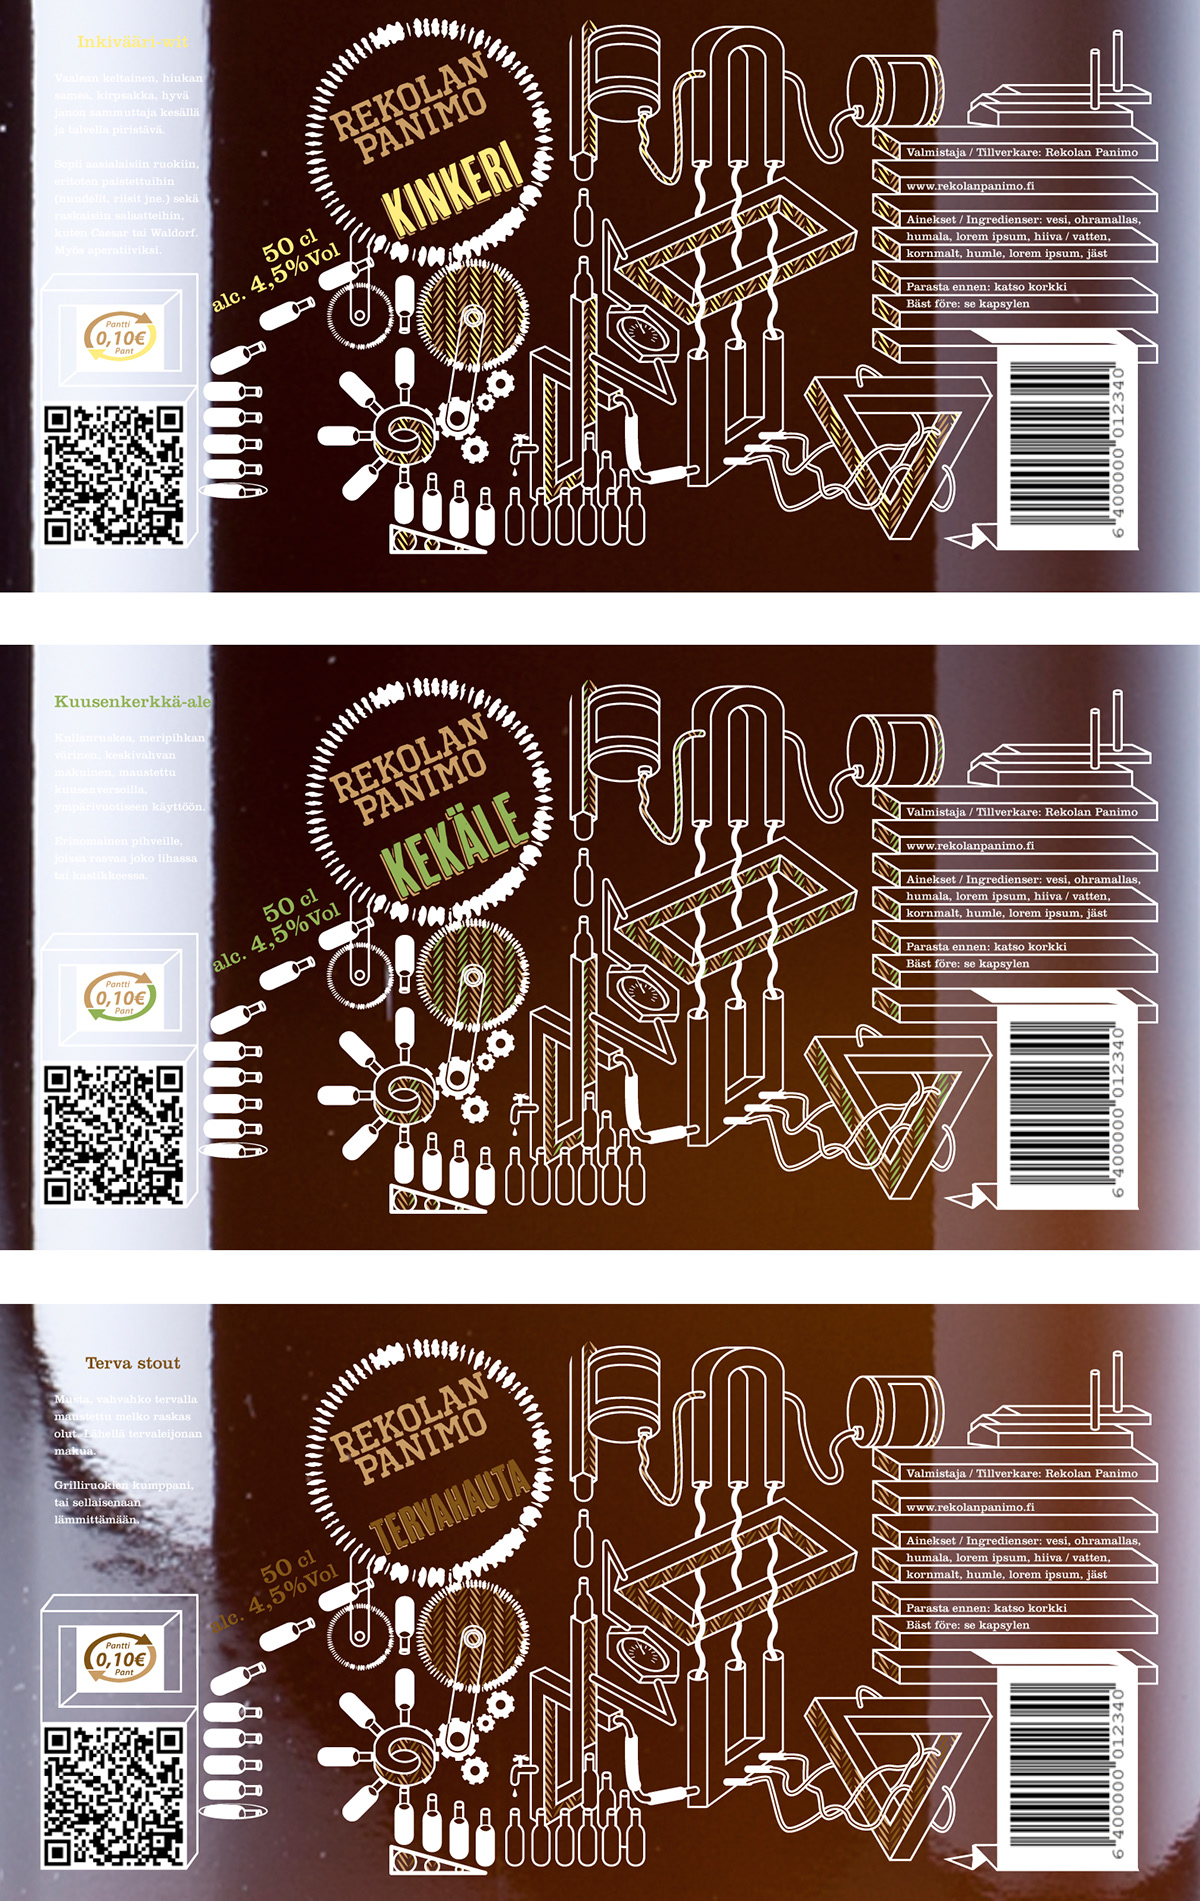 Merisalo beer Label impossible objects